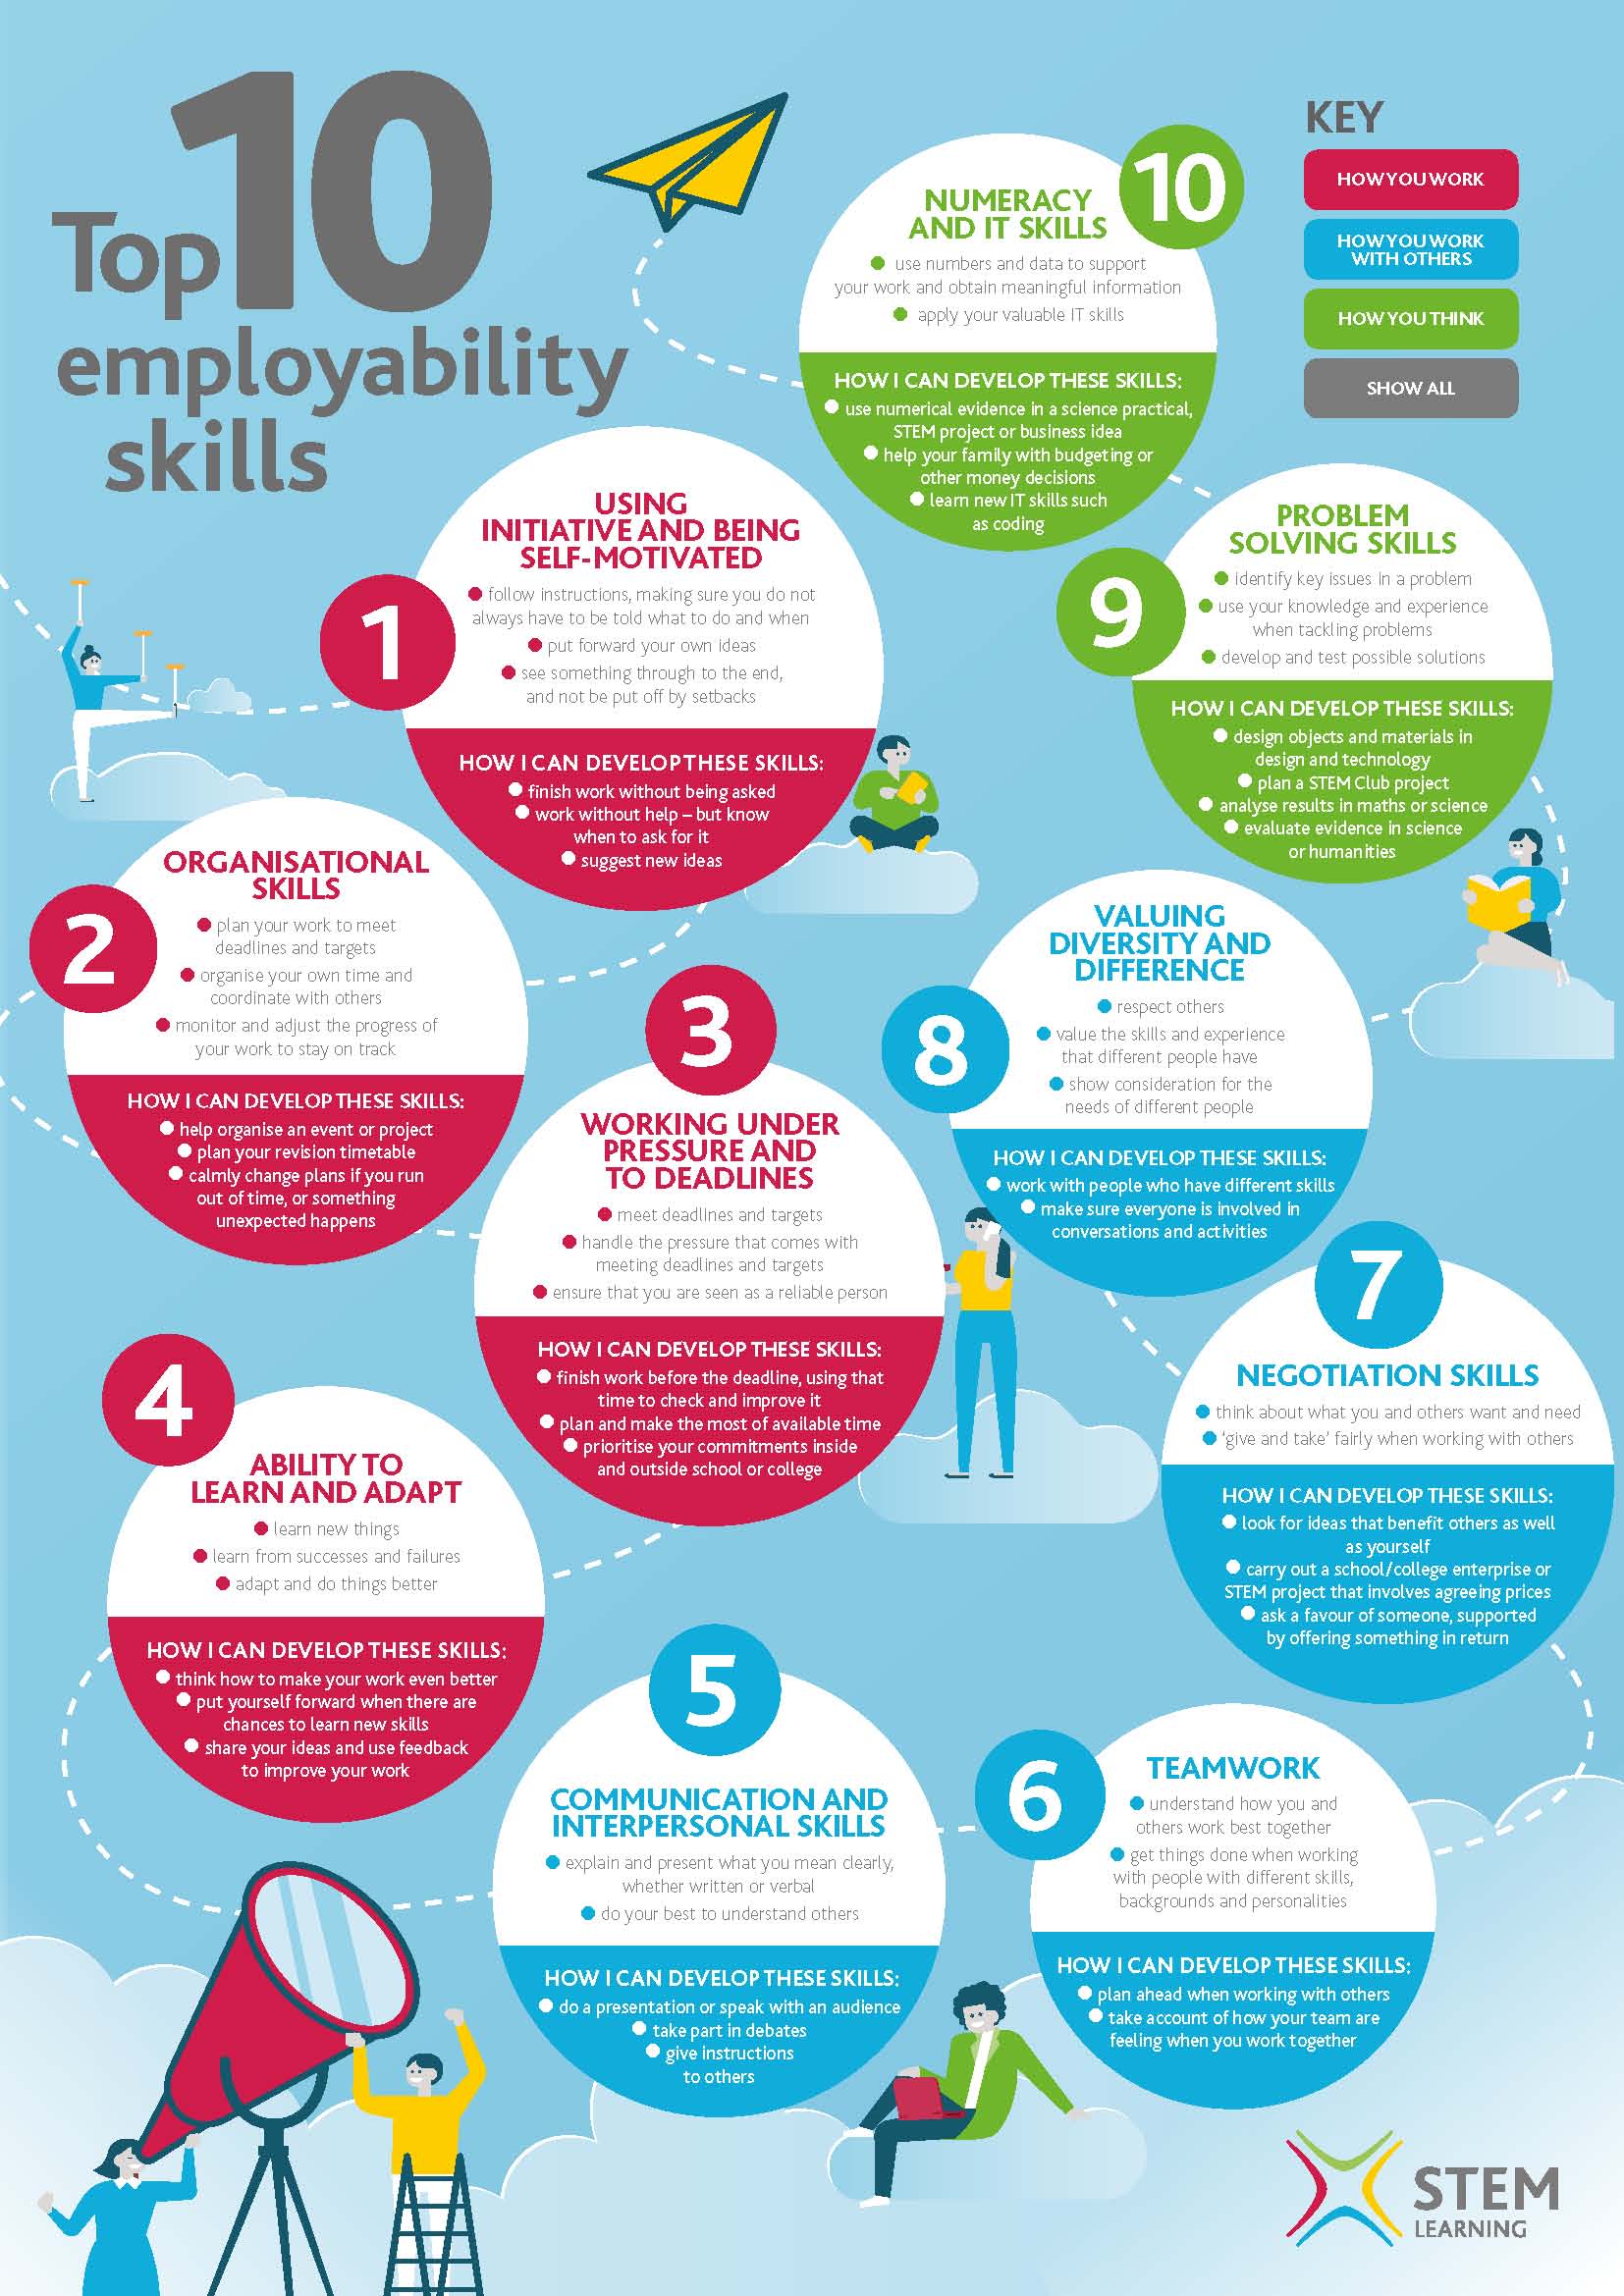 Click this image for a full size pdf to see what you can do to improve your employability skills